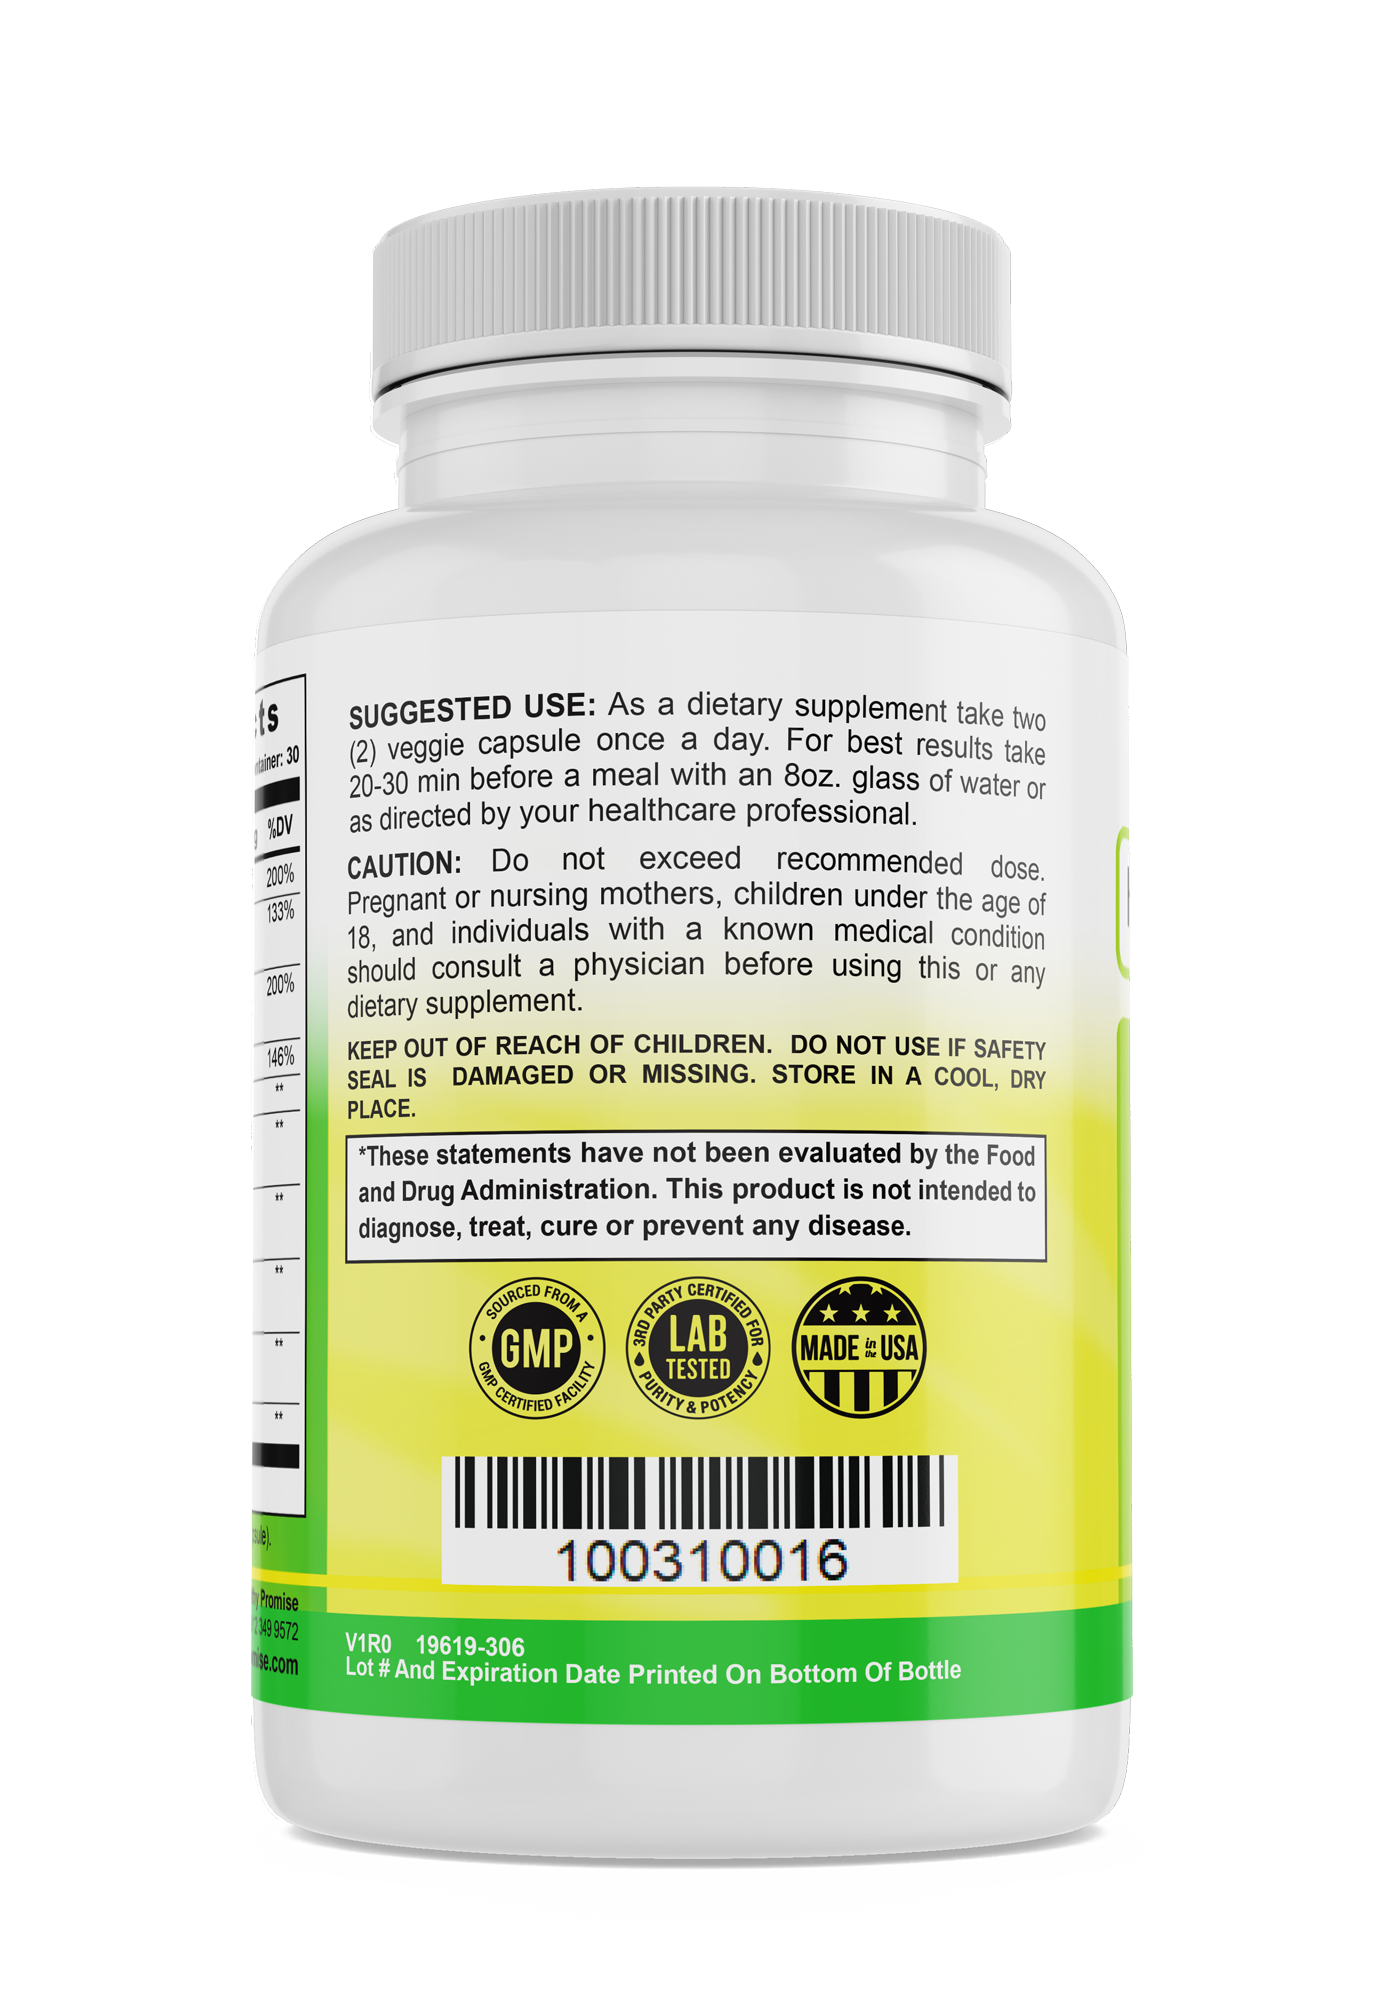 the healthy promise emergency immune support dietary vitamin supplement bottle suggested use